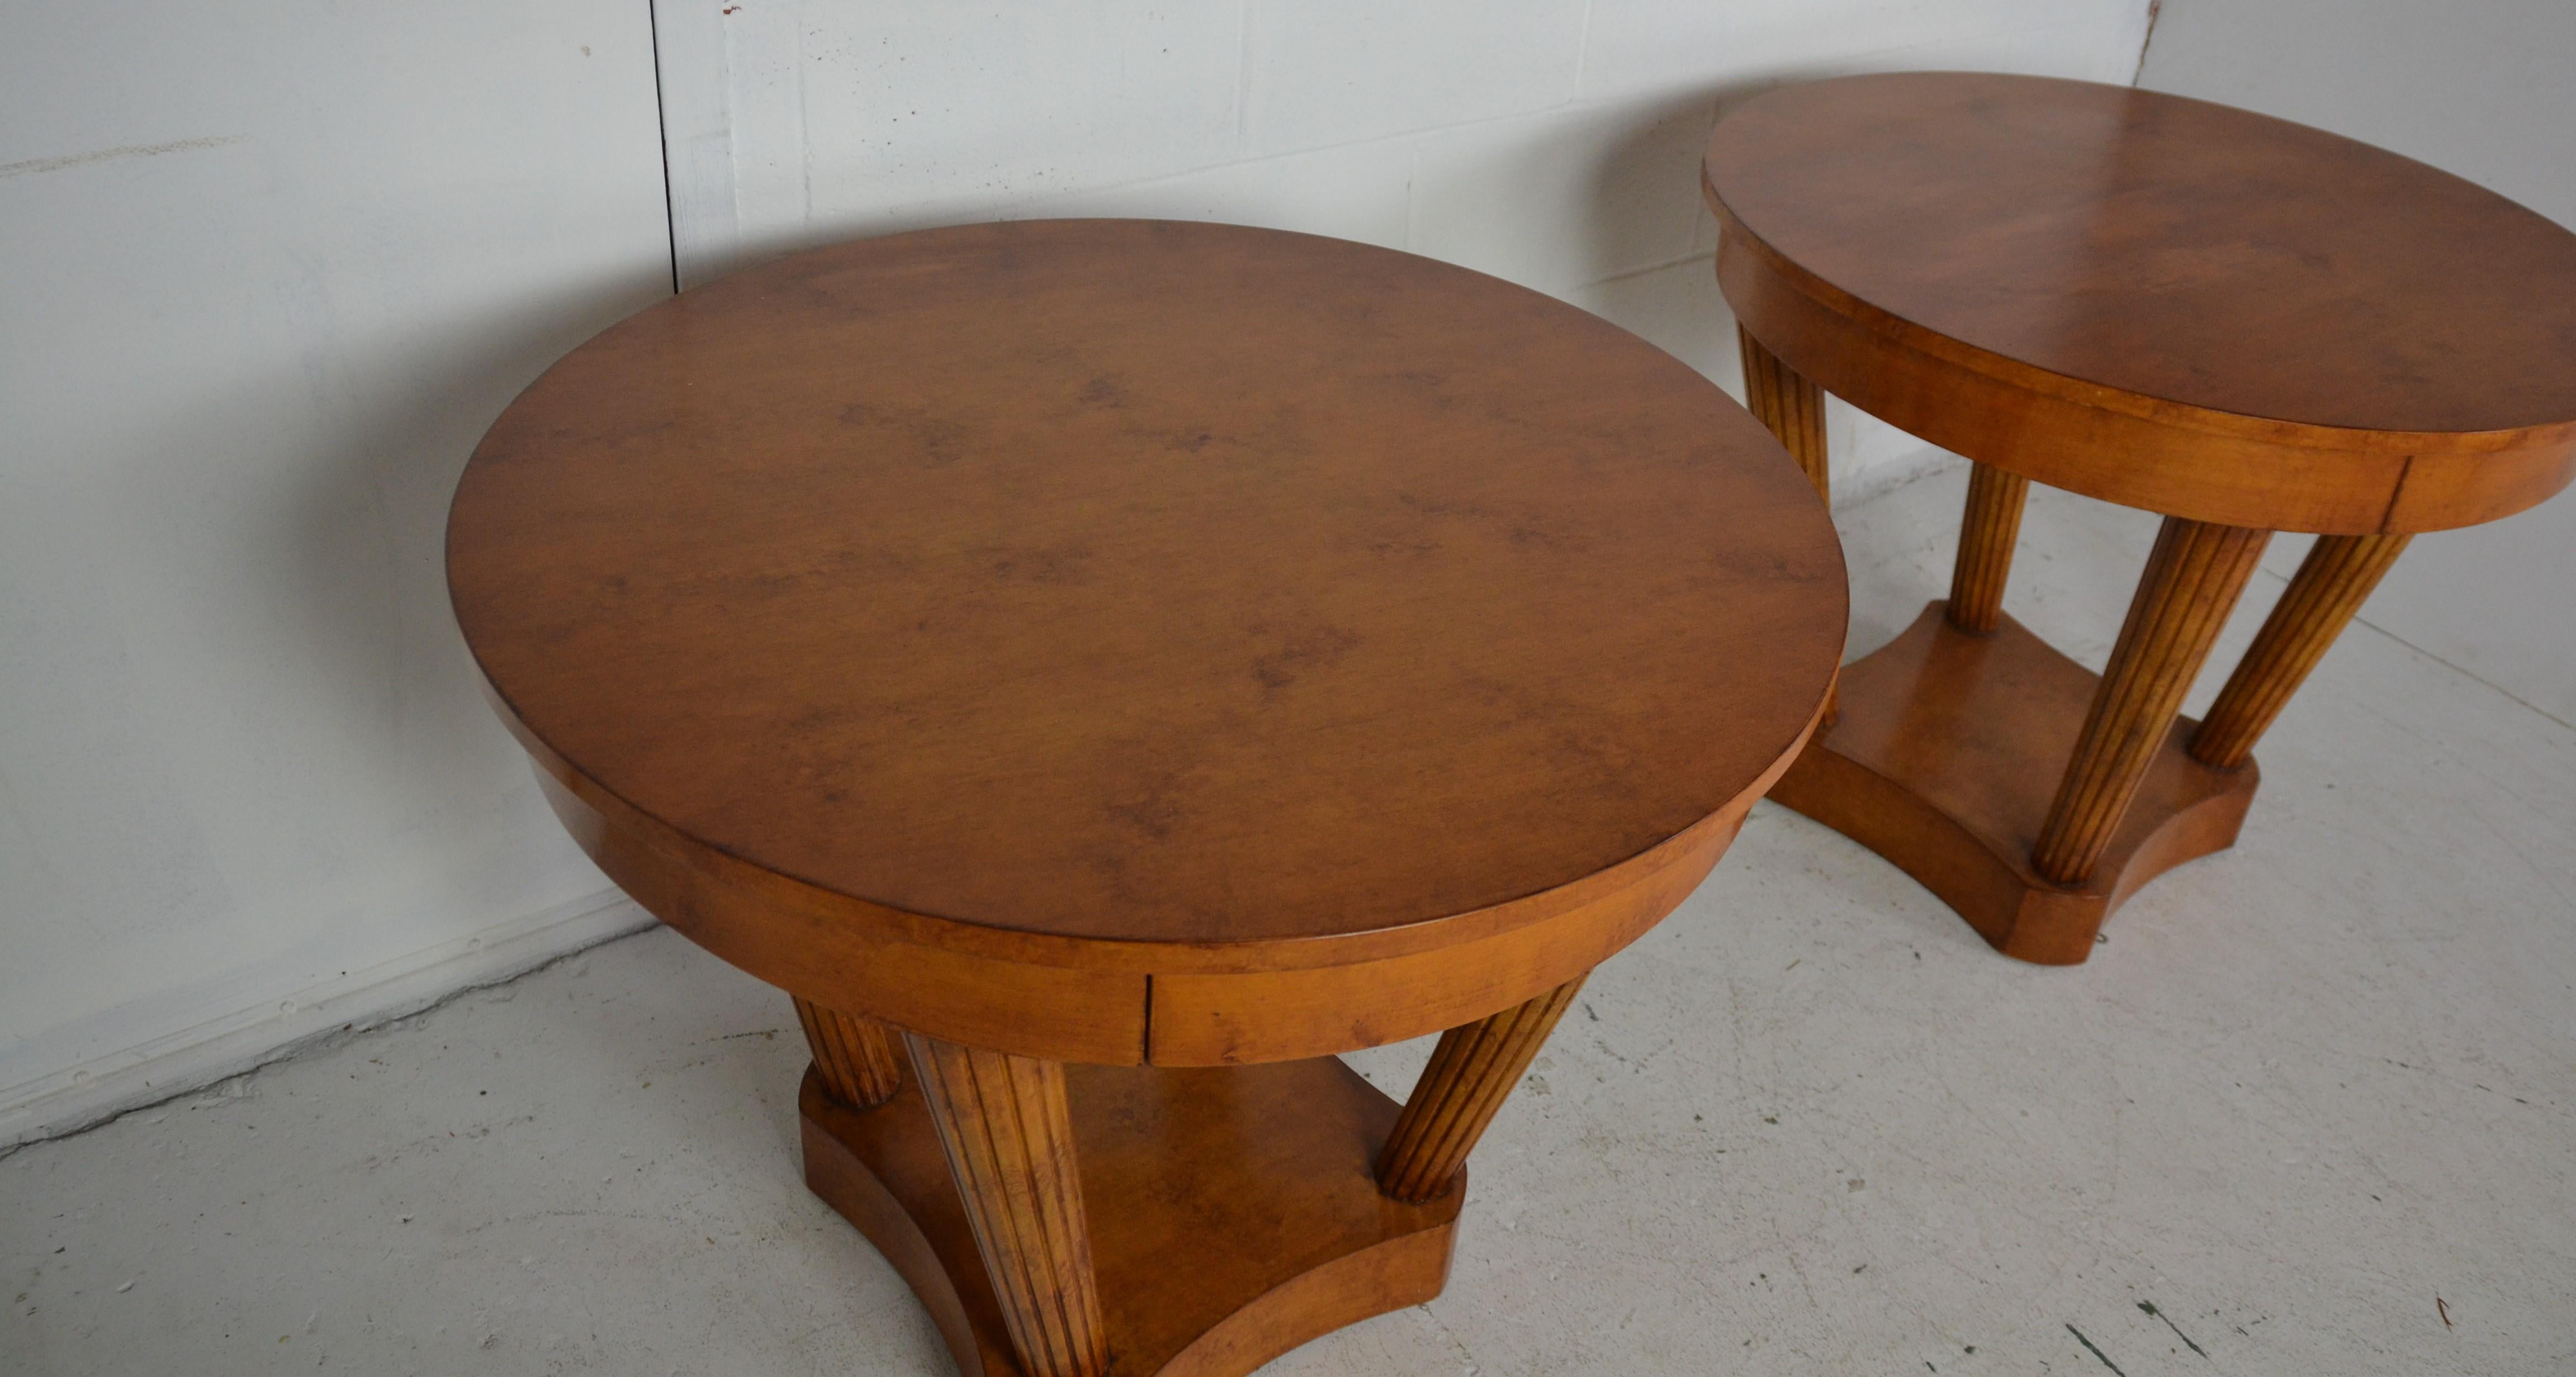 Pair of large hardwood end tables with platform bases. Single drawer to each.